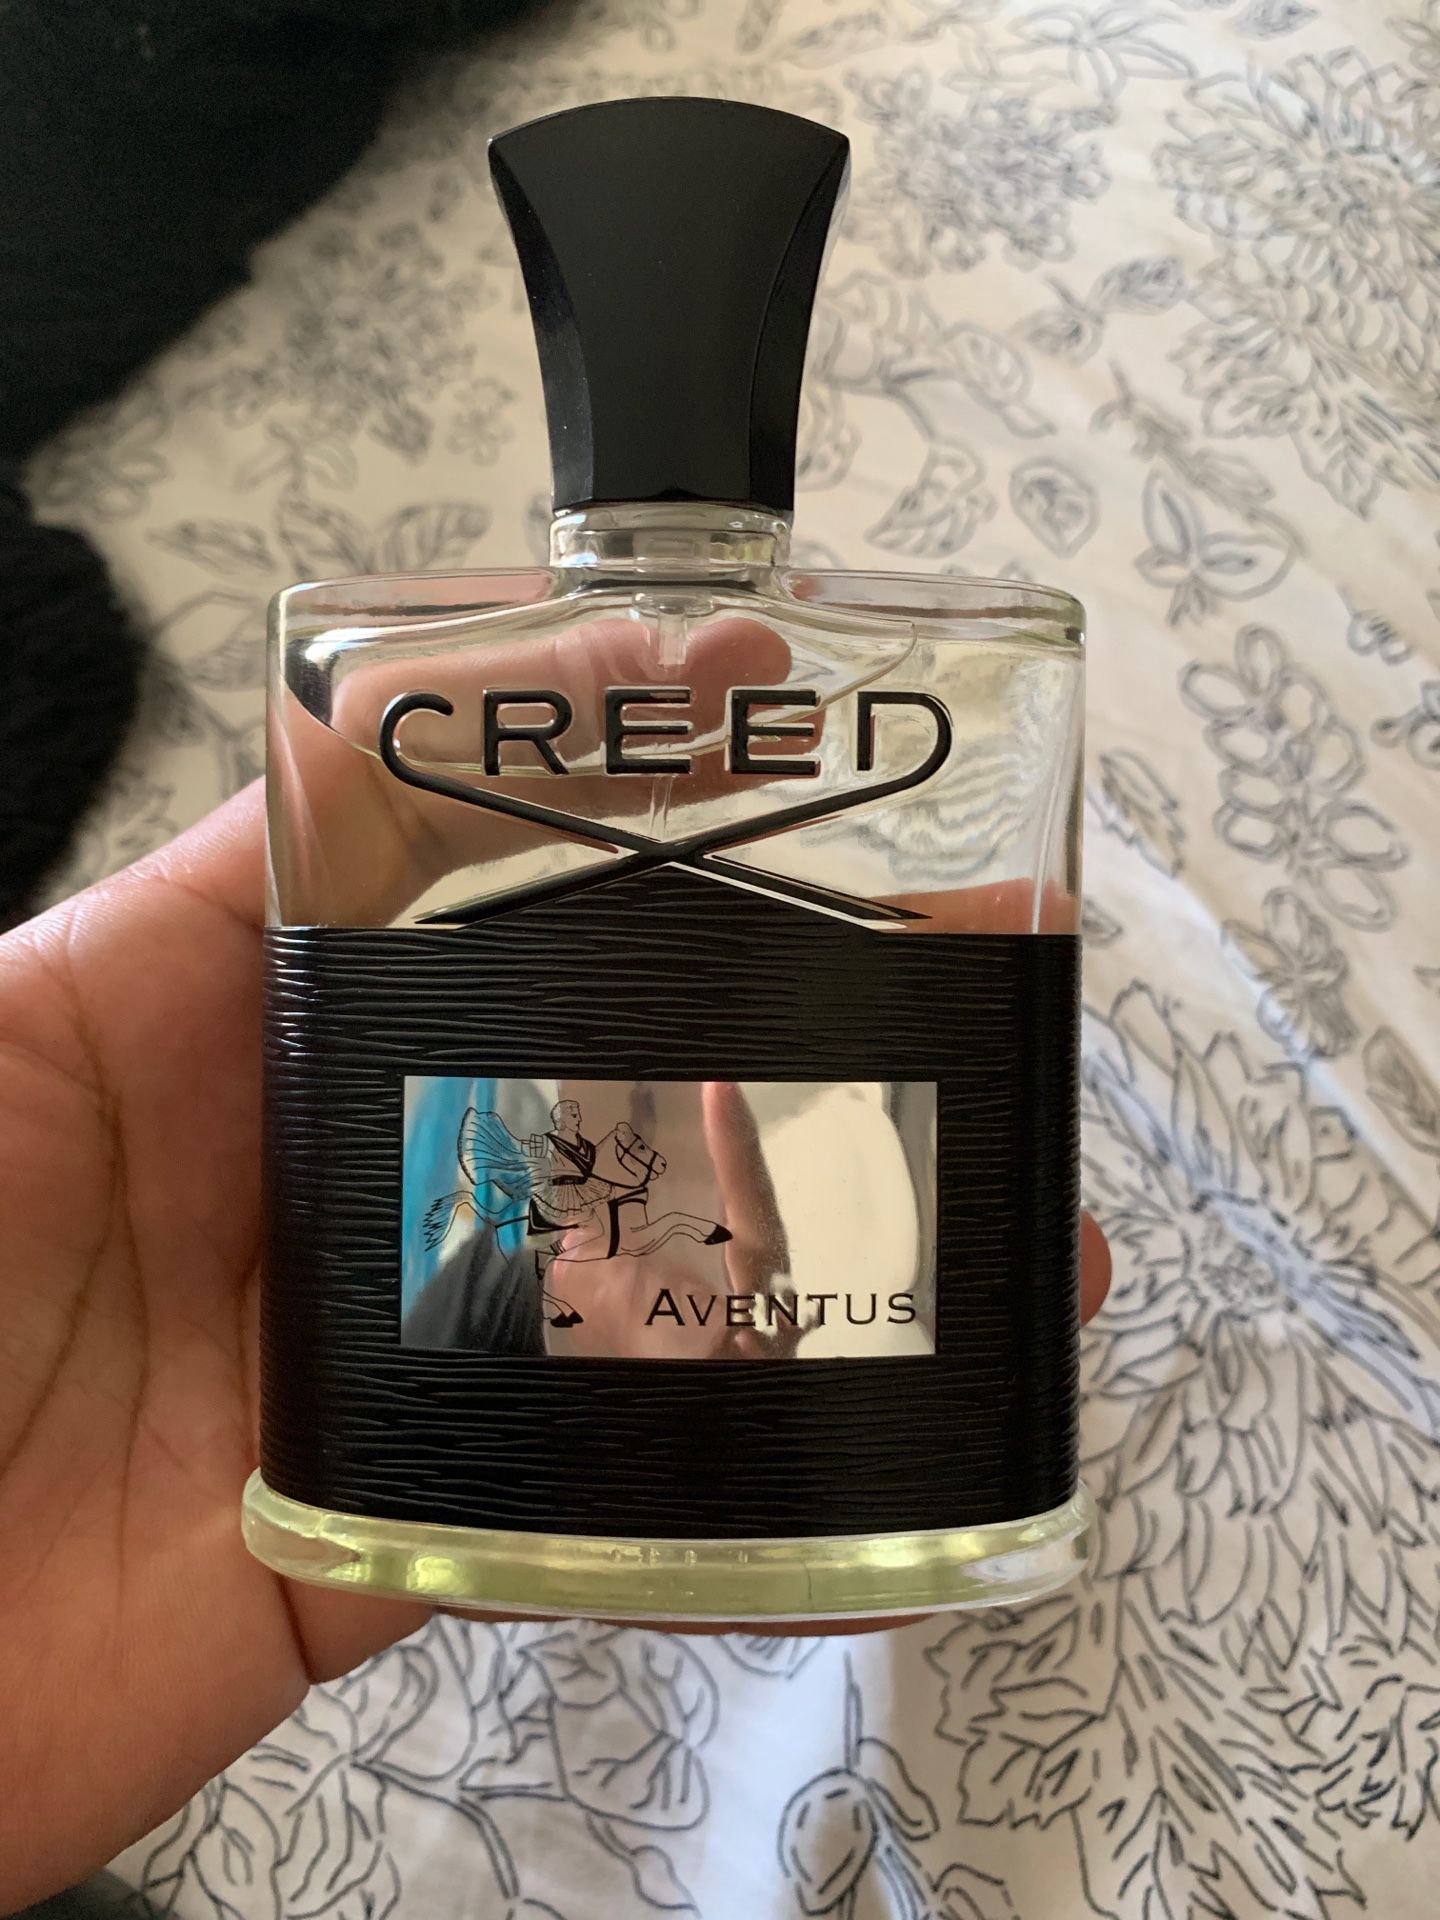 Creed Aventus 120ml batch 16c01 for Sale in Spring Valley, CA